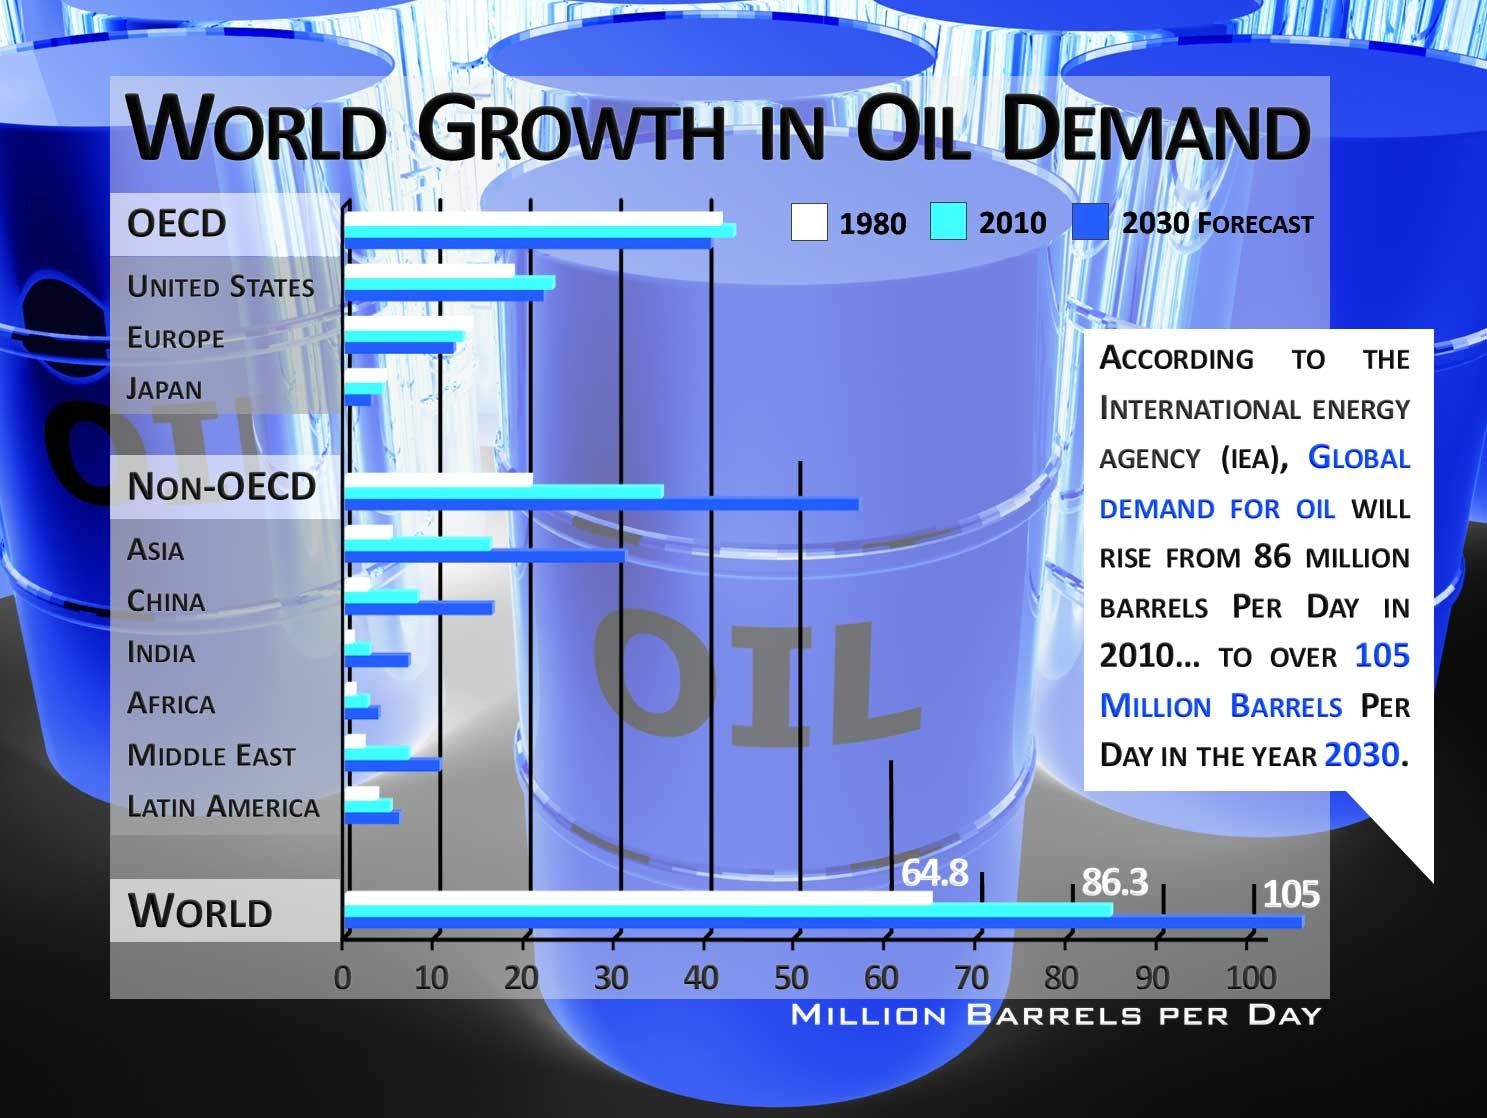 /assets/contentimages/World-Growth-in-Oil-Demand.jpg